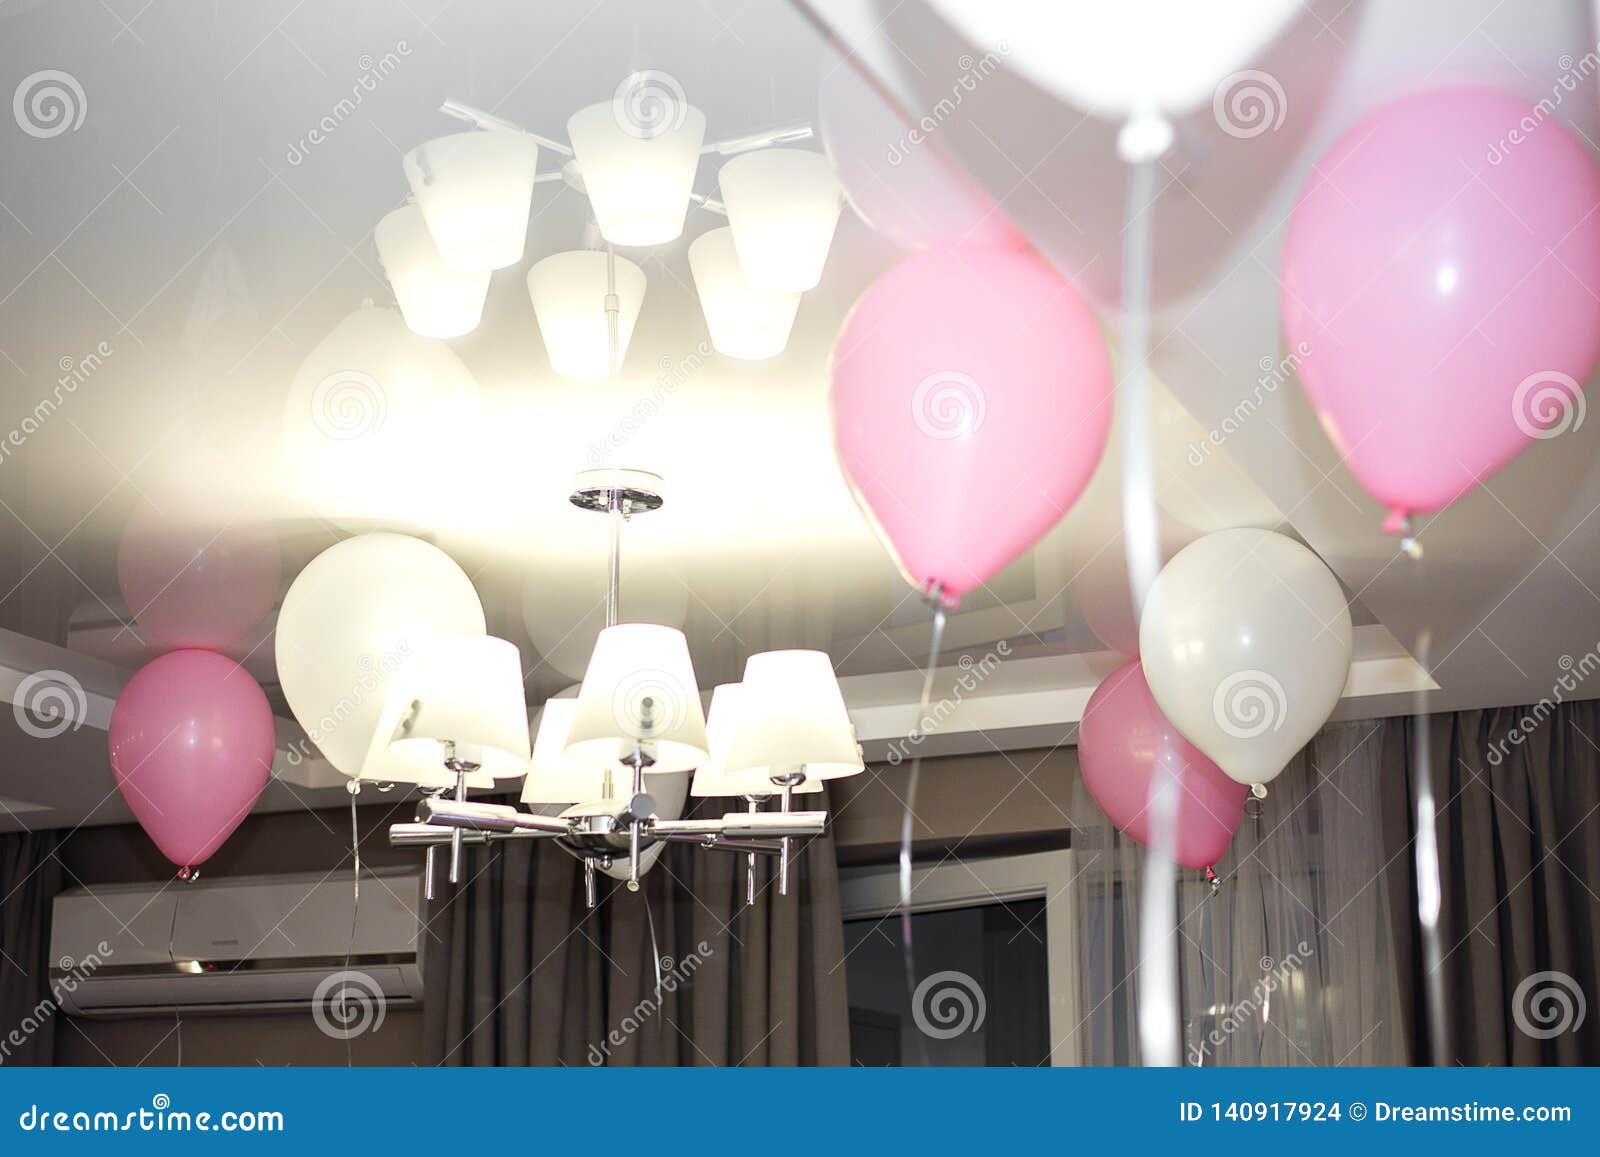 Birthday Pink Balloons Under The Ceiling At Home Stock Photo